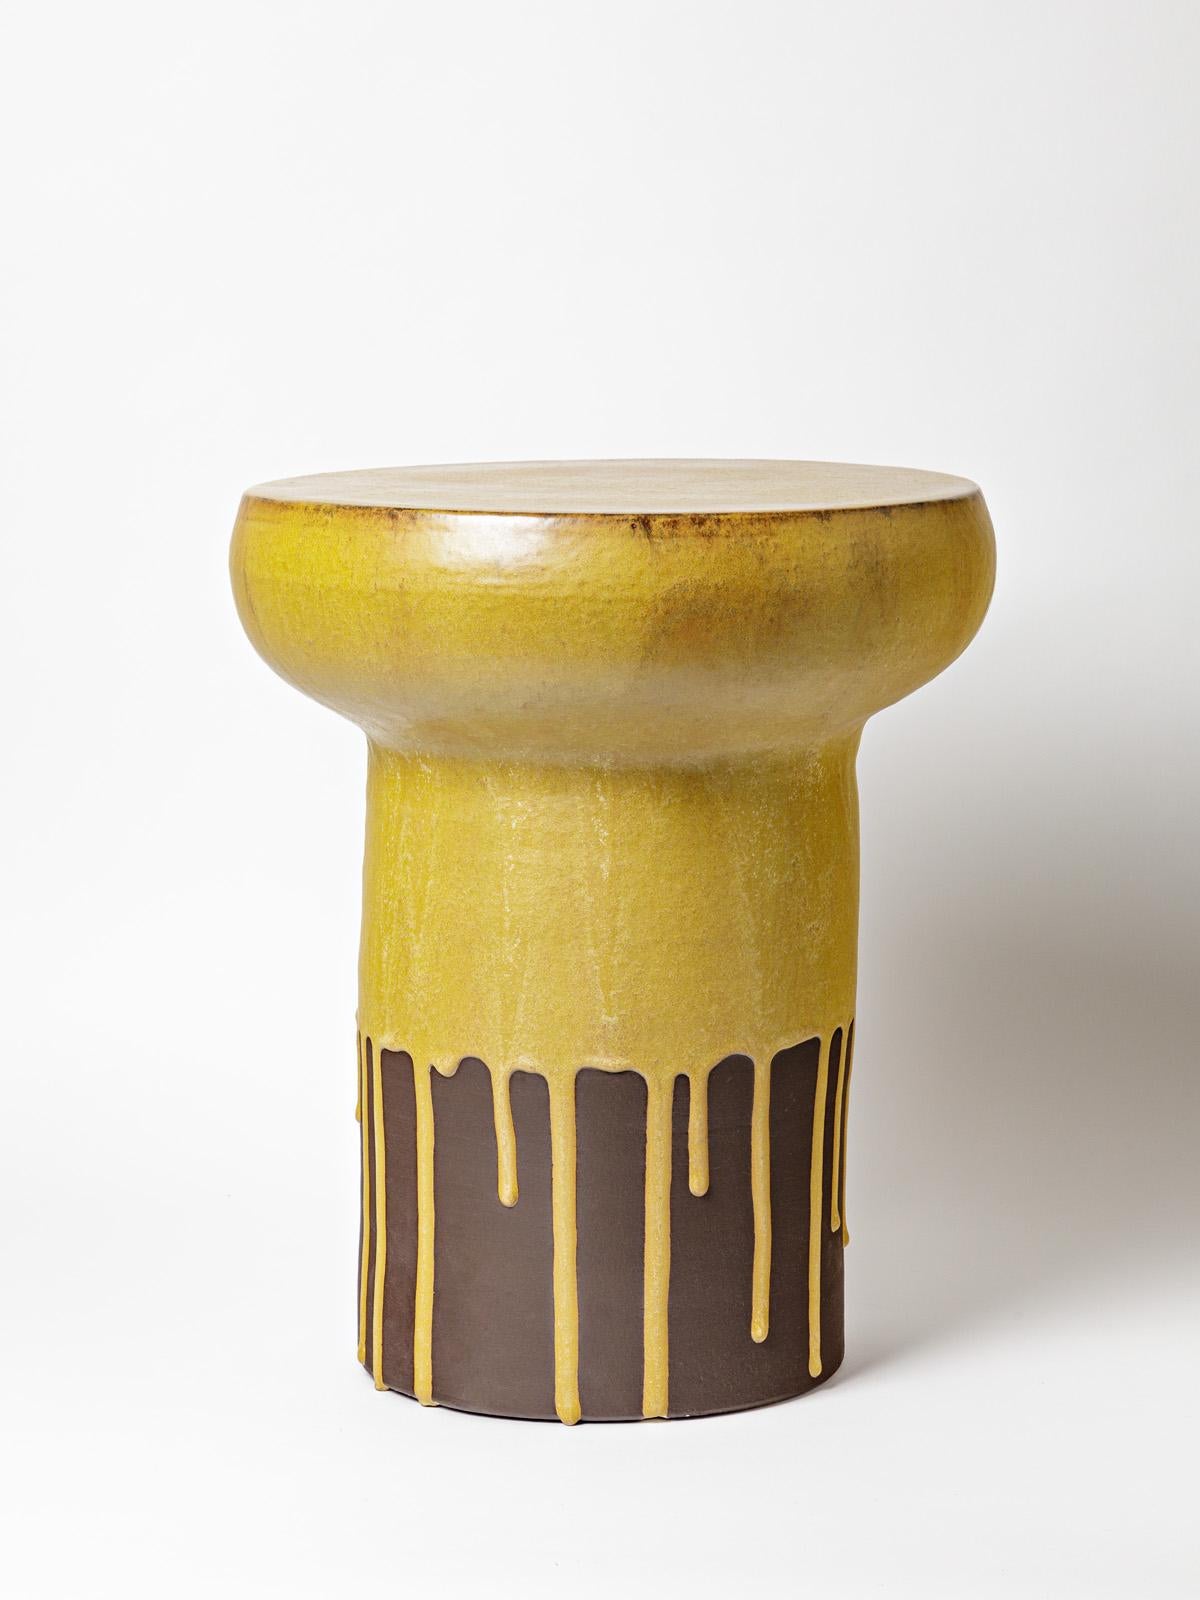 French Ceramic Stool or Table with Glazes Decoration by Mia Jensen, circa 2022